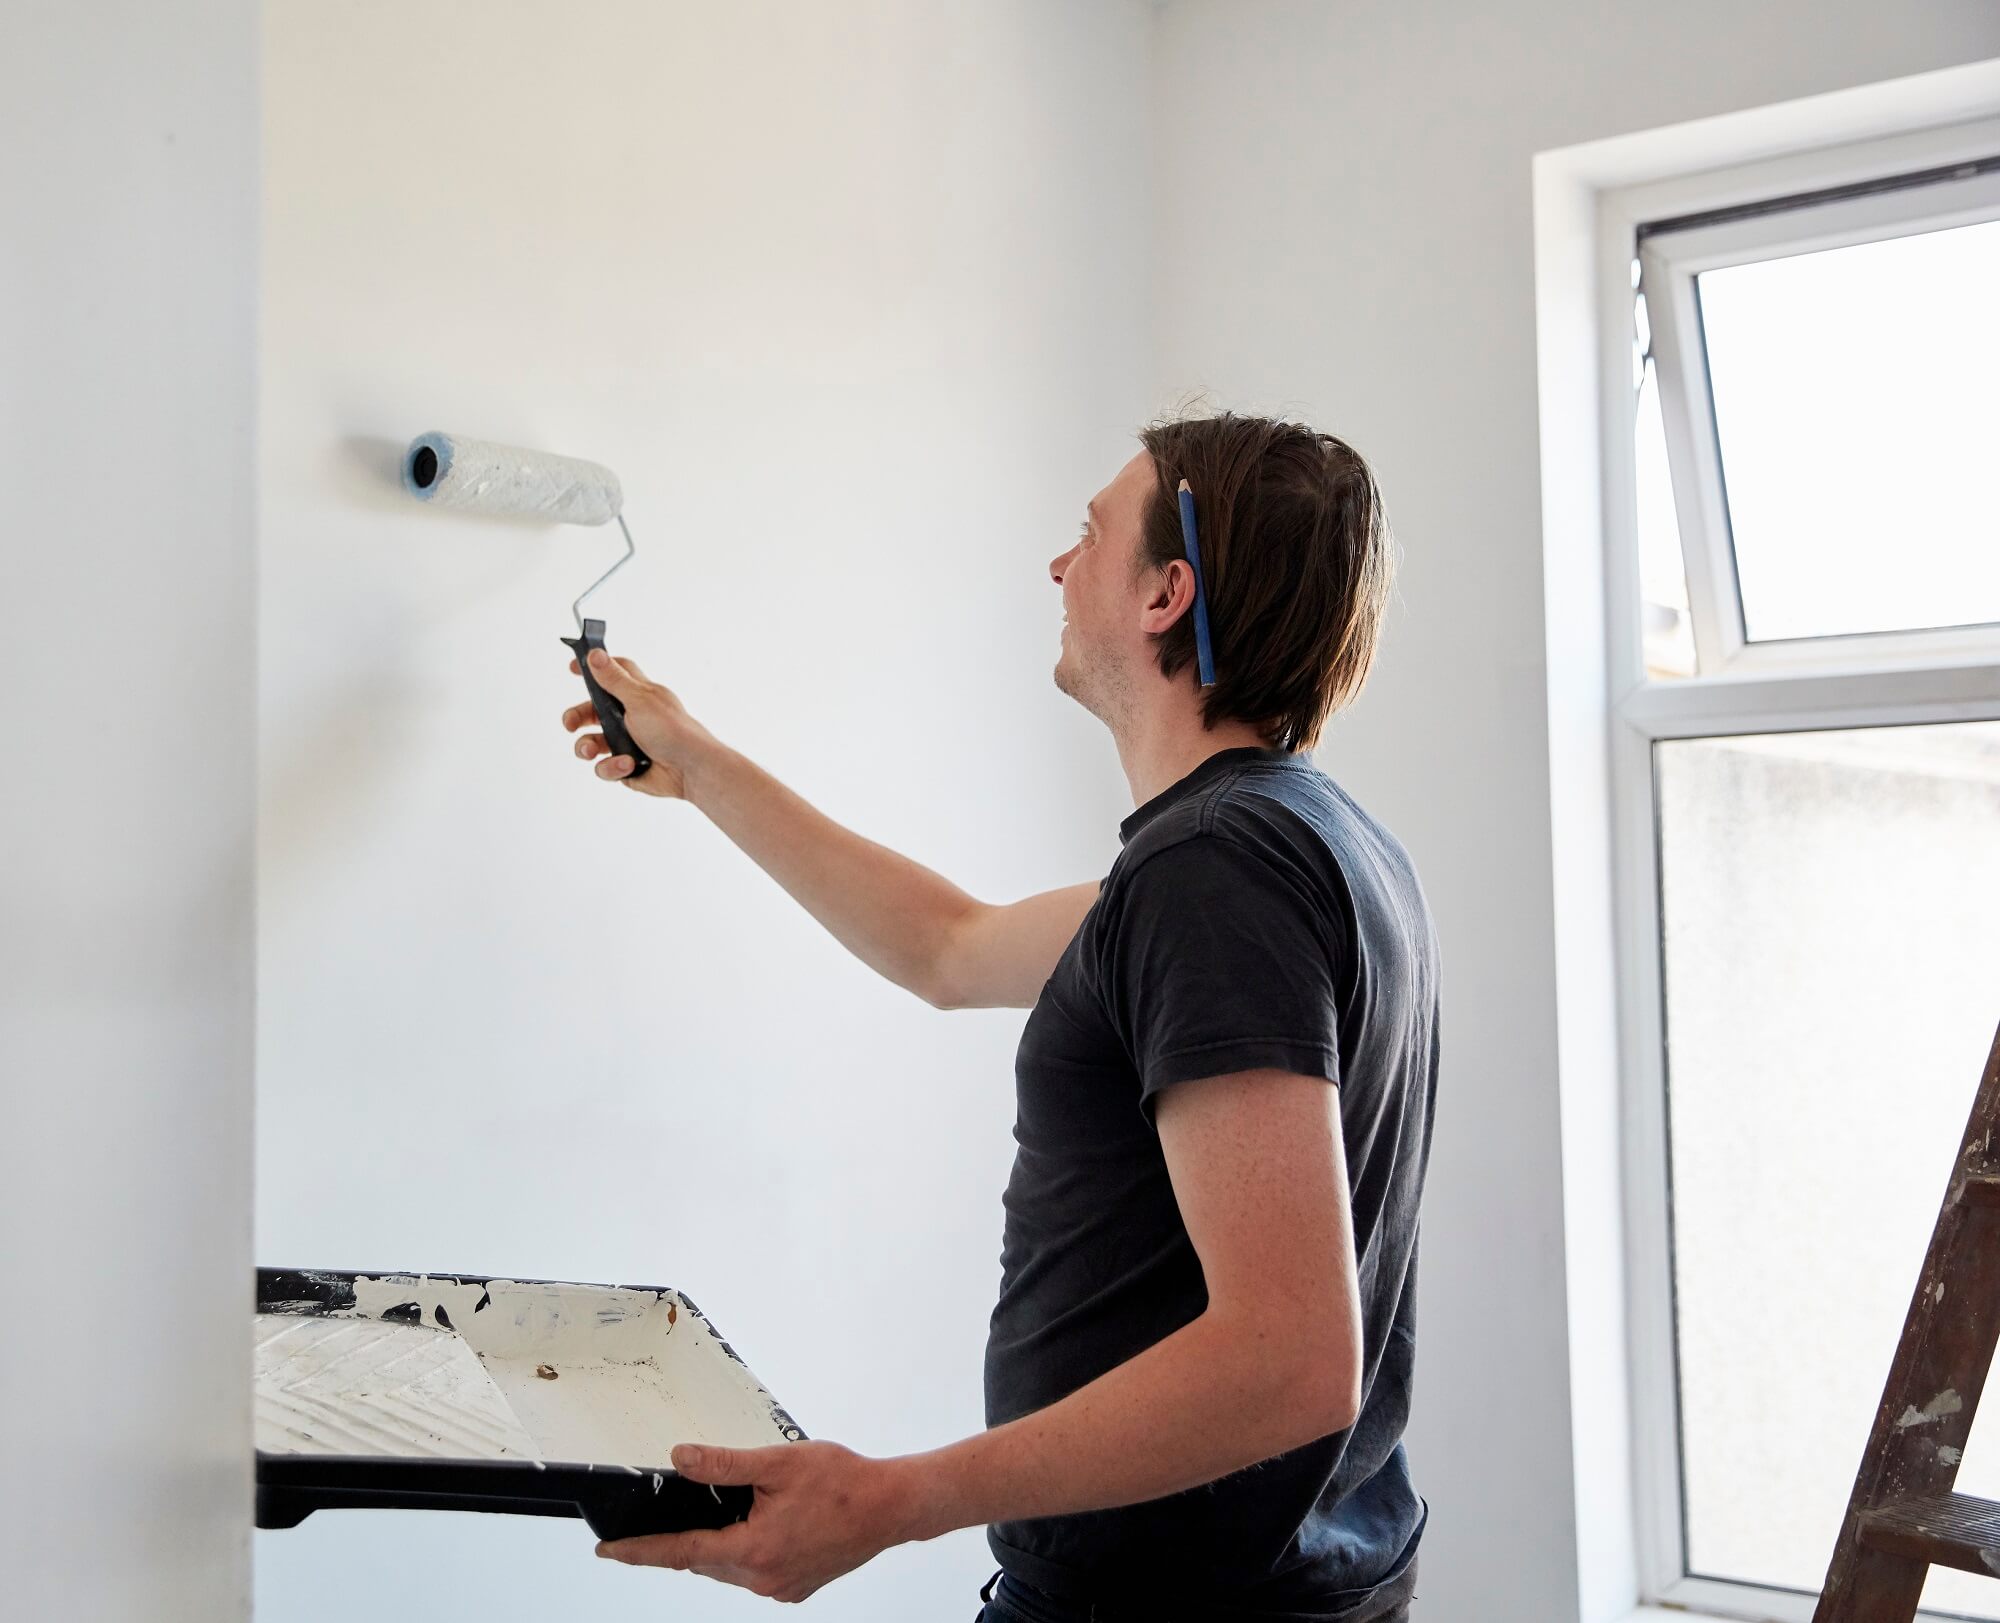 A painter using a paint roller and holding a paint tray, decorating a room.